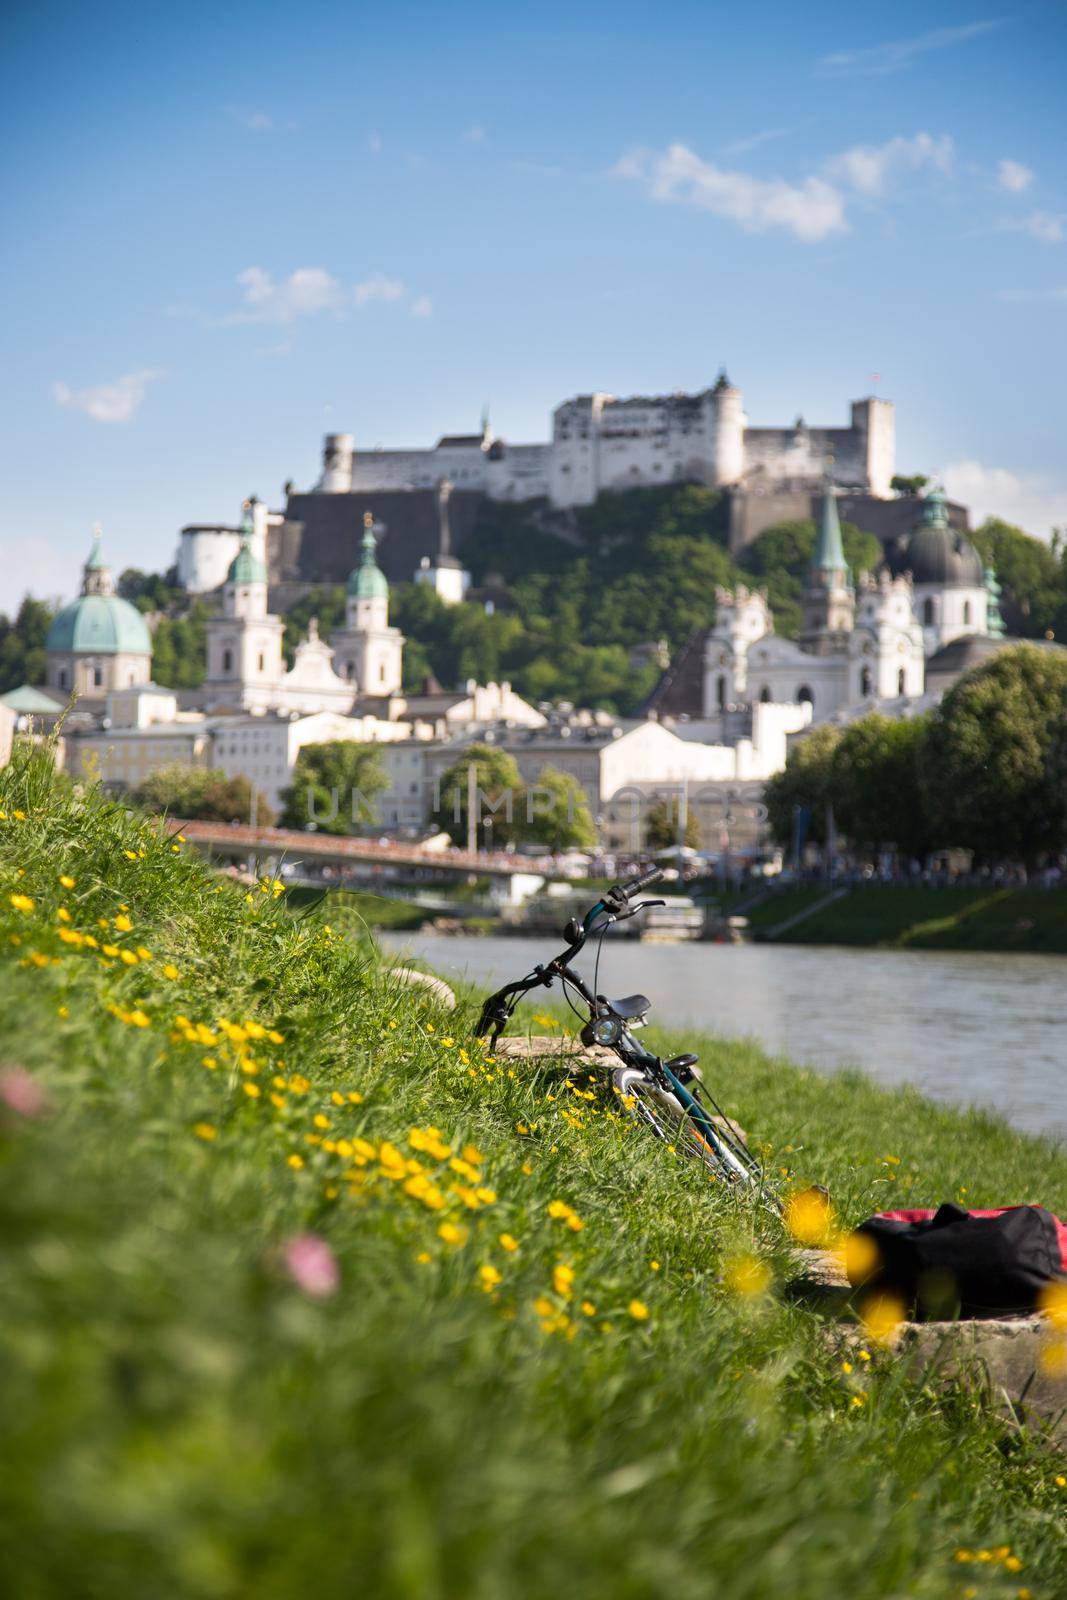 Panoramic city landscape of Salzburg in Summer, Bicycle in the foreground.